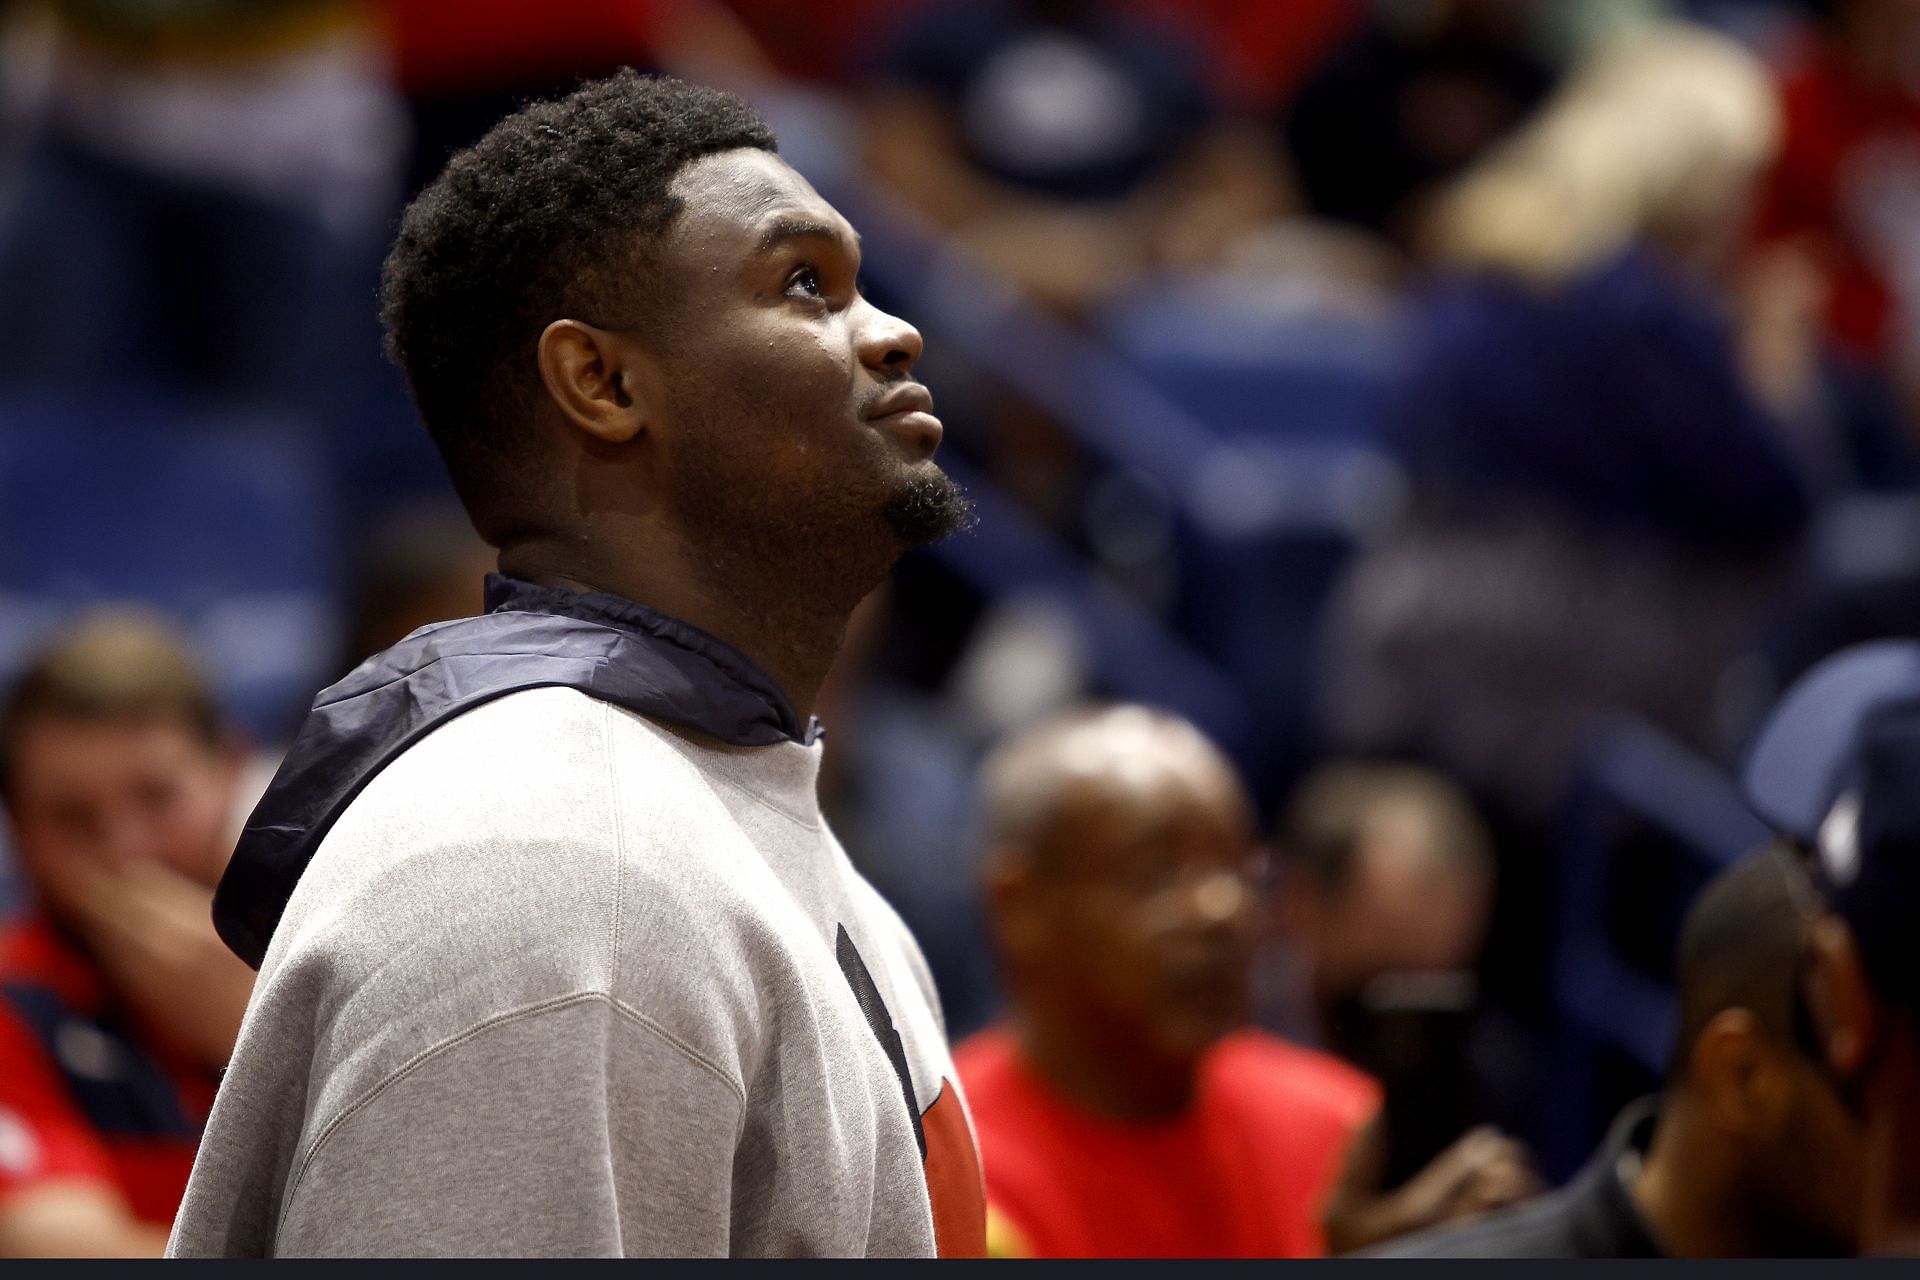 Zion Williamson is still aiming to return to the New Orleans Pelicans during the playoffs.